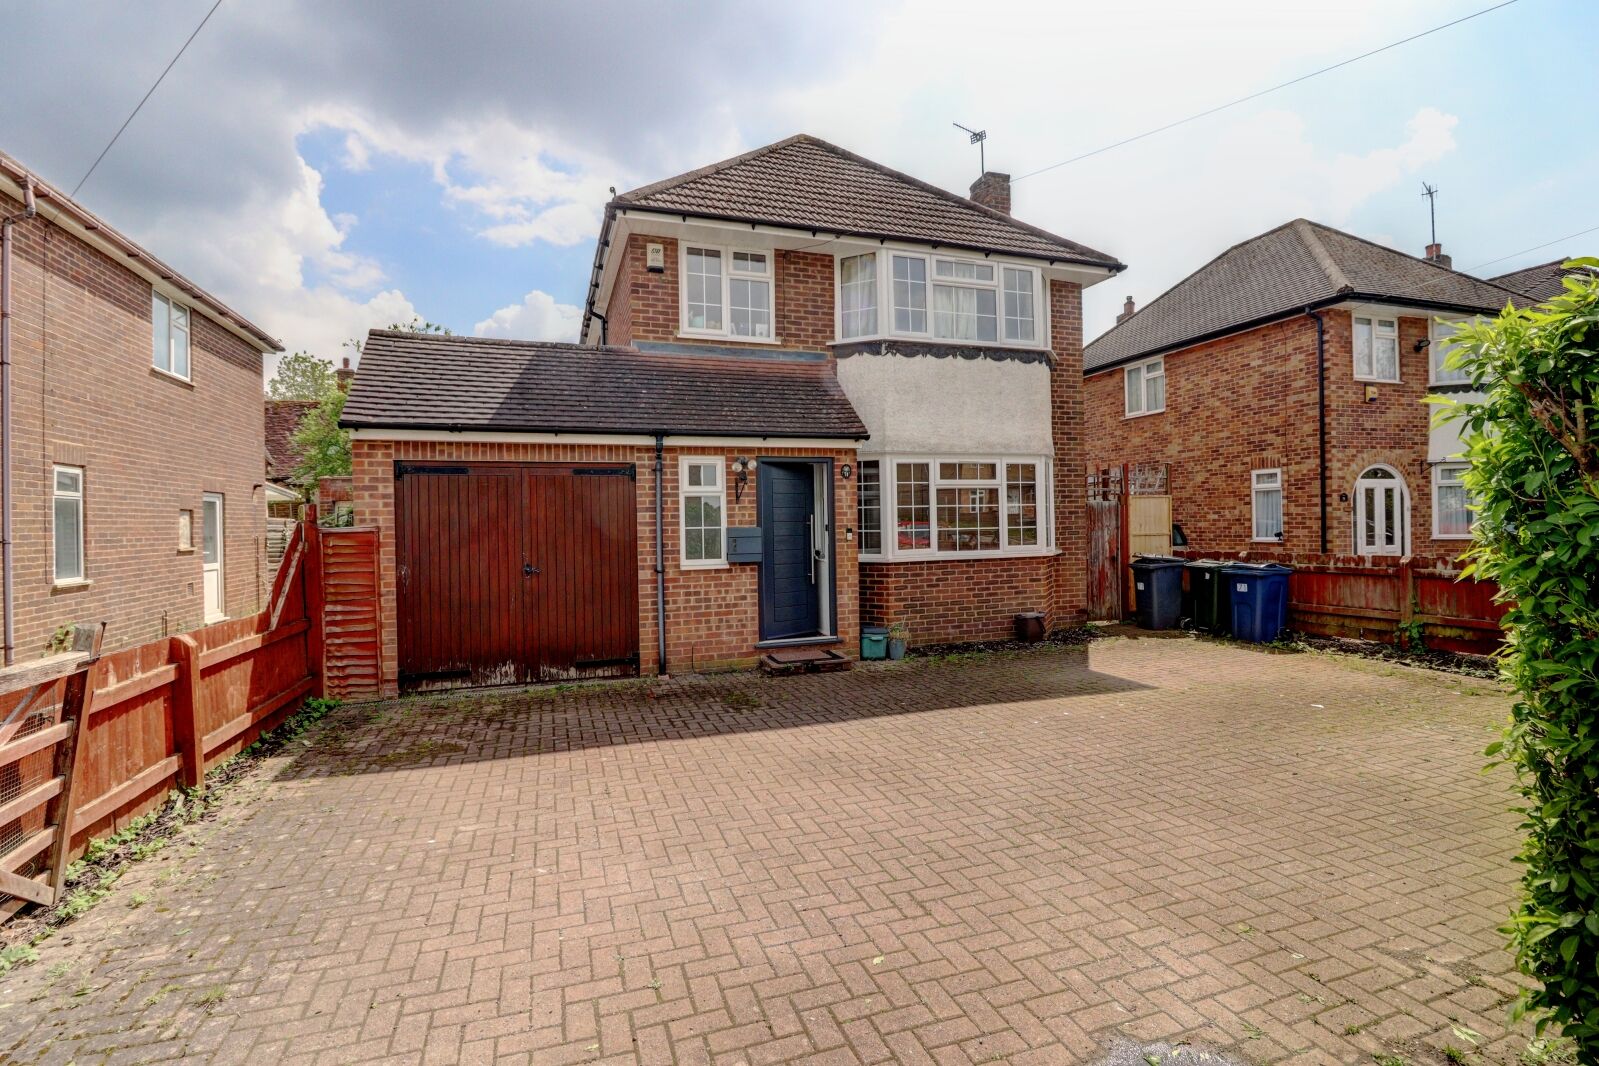 3 bedroom detached house for sale Lane End Road, High Wycombe, HP12, main image